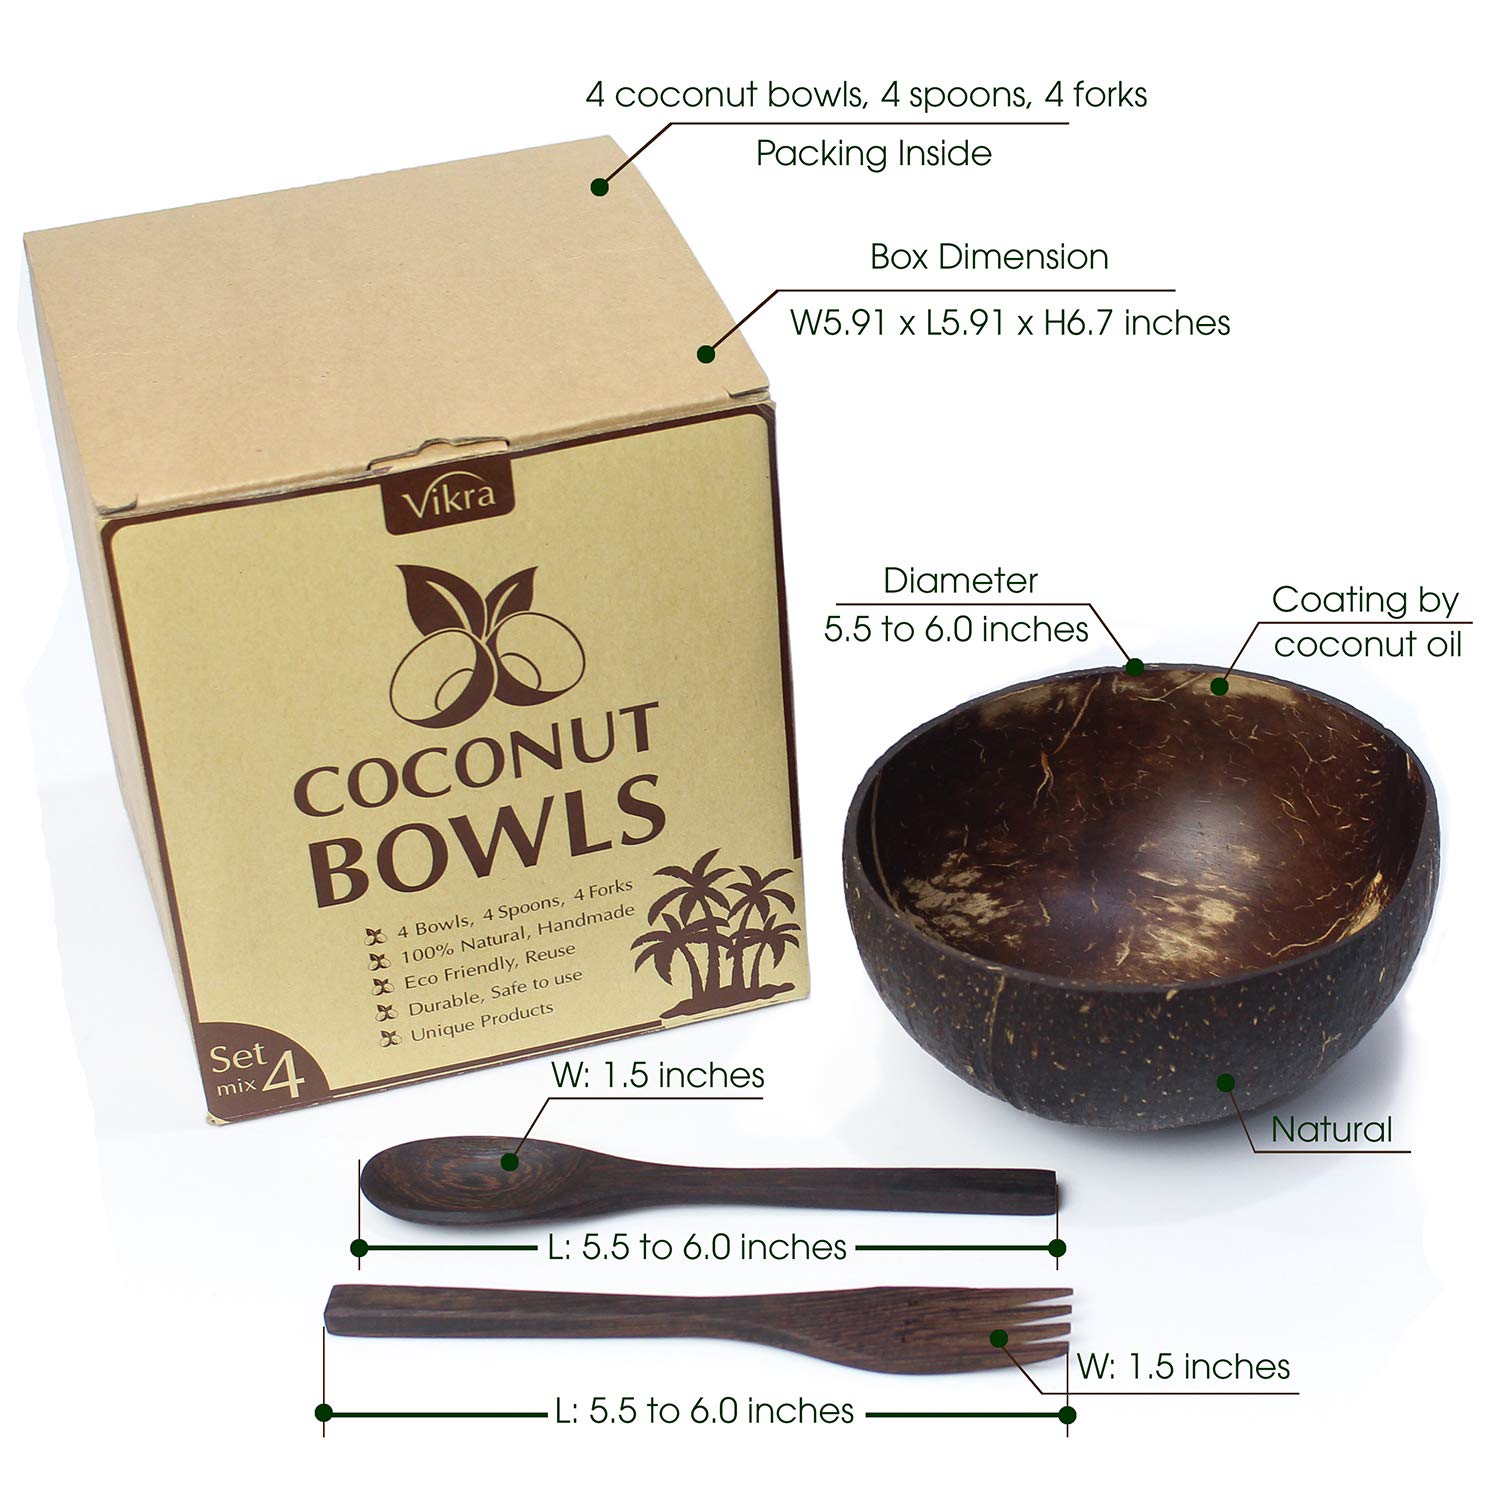 Vikra (Set mix 4) Vietnamese Coconut Bowls with Spoons and Forks 100% Natural, Handmade, Eco Friendly. Bowls for Kitchen, Salad Bowls, Smoothie Bowls, Acai Bowls, Vegans Gift, Decorations